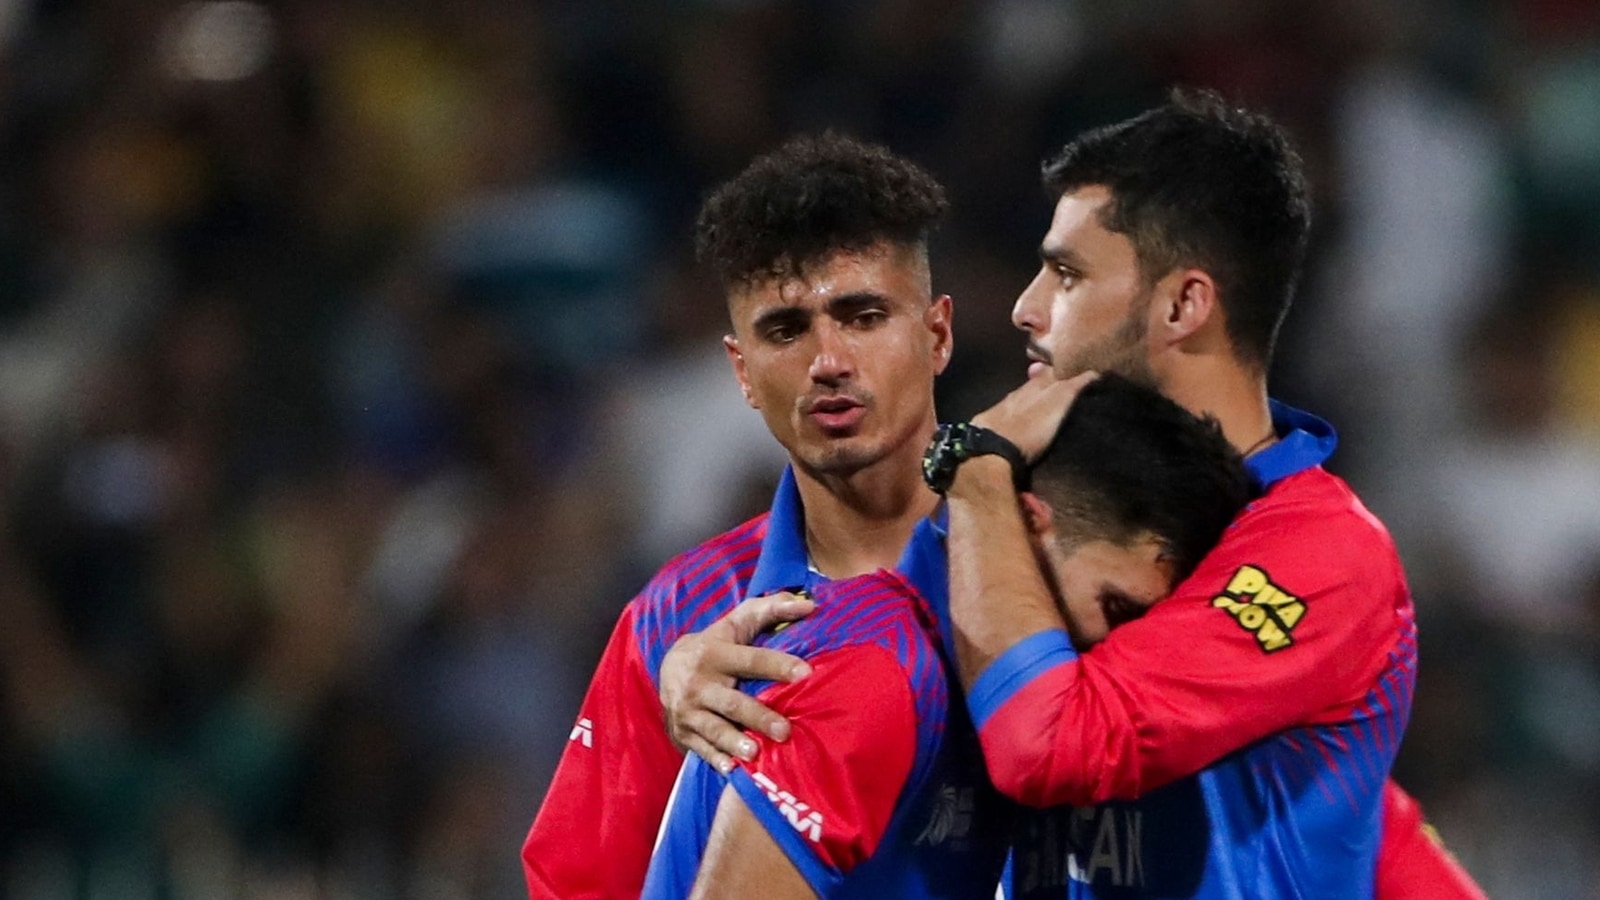 Watch Afghanistan players break into tears after Pakistans last-over win Cricket